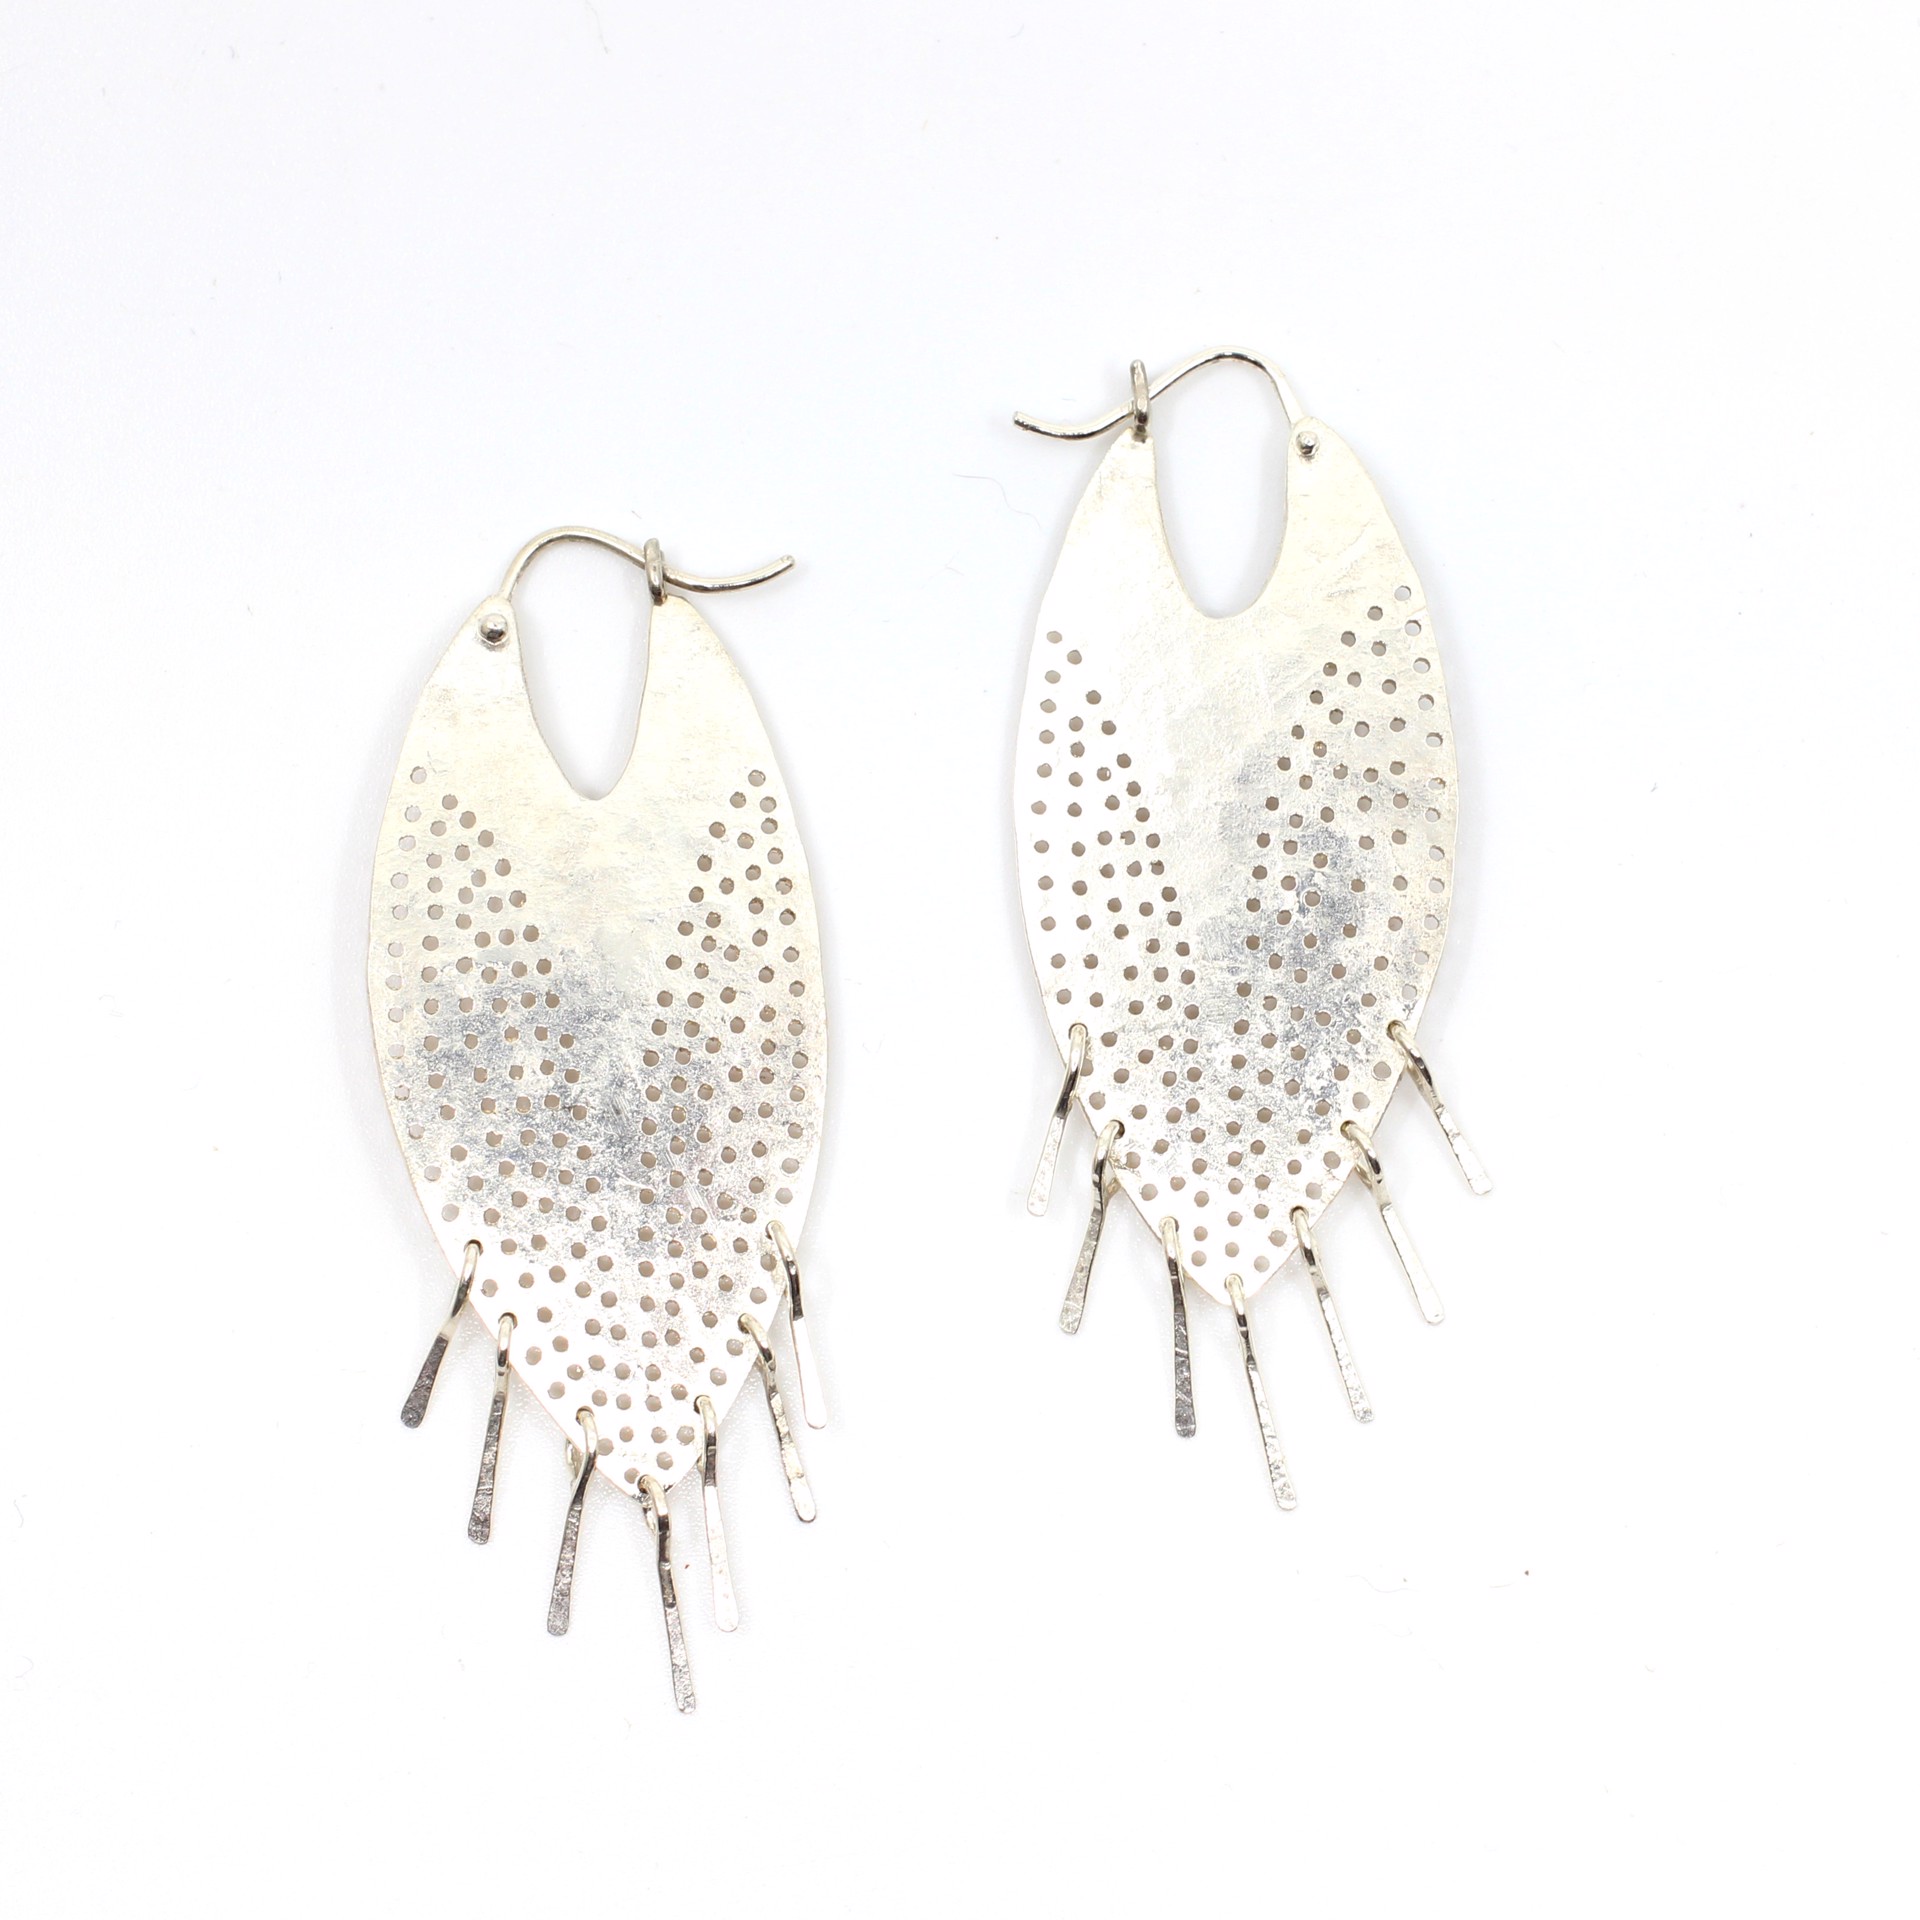 Sheild Earrings with Fringe (Bright) by Leia Zumbro